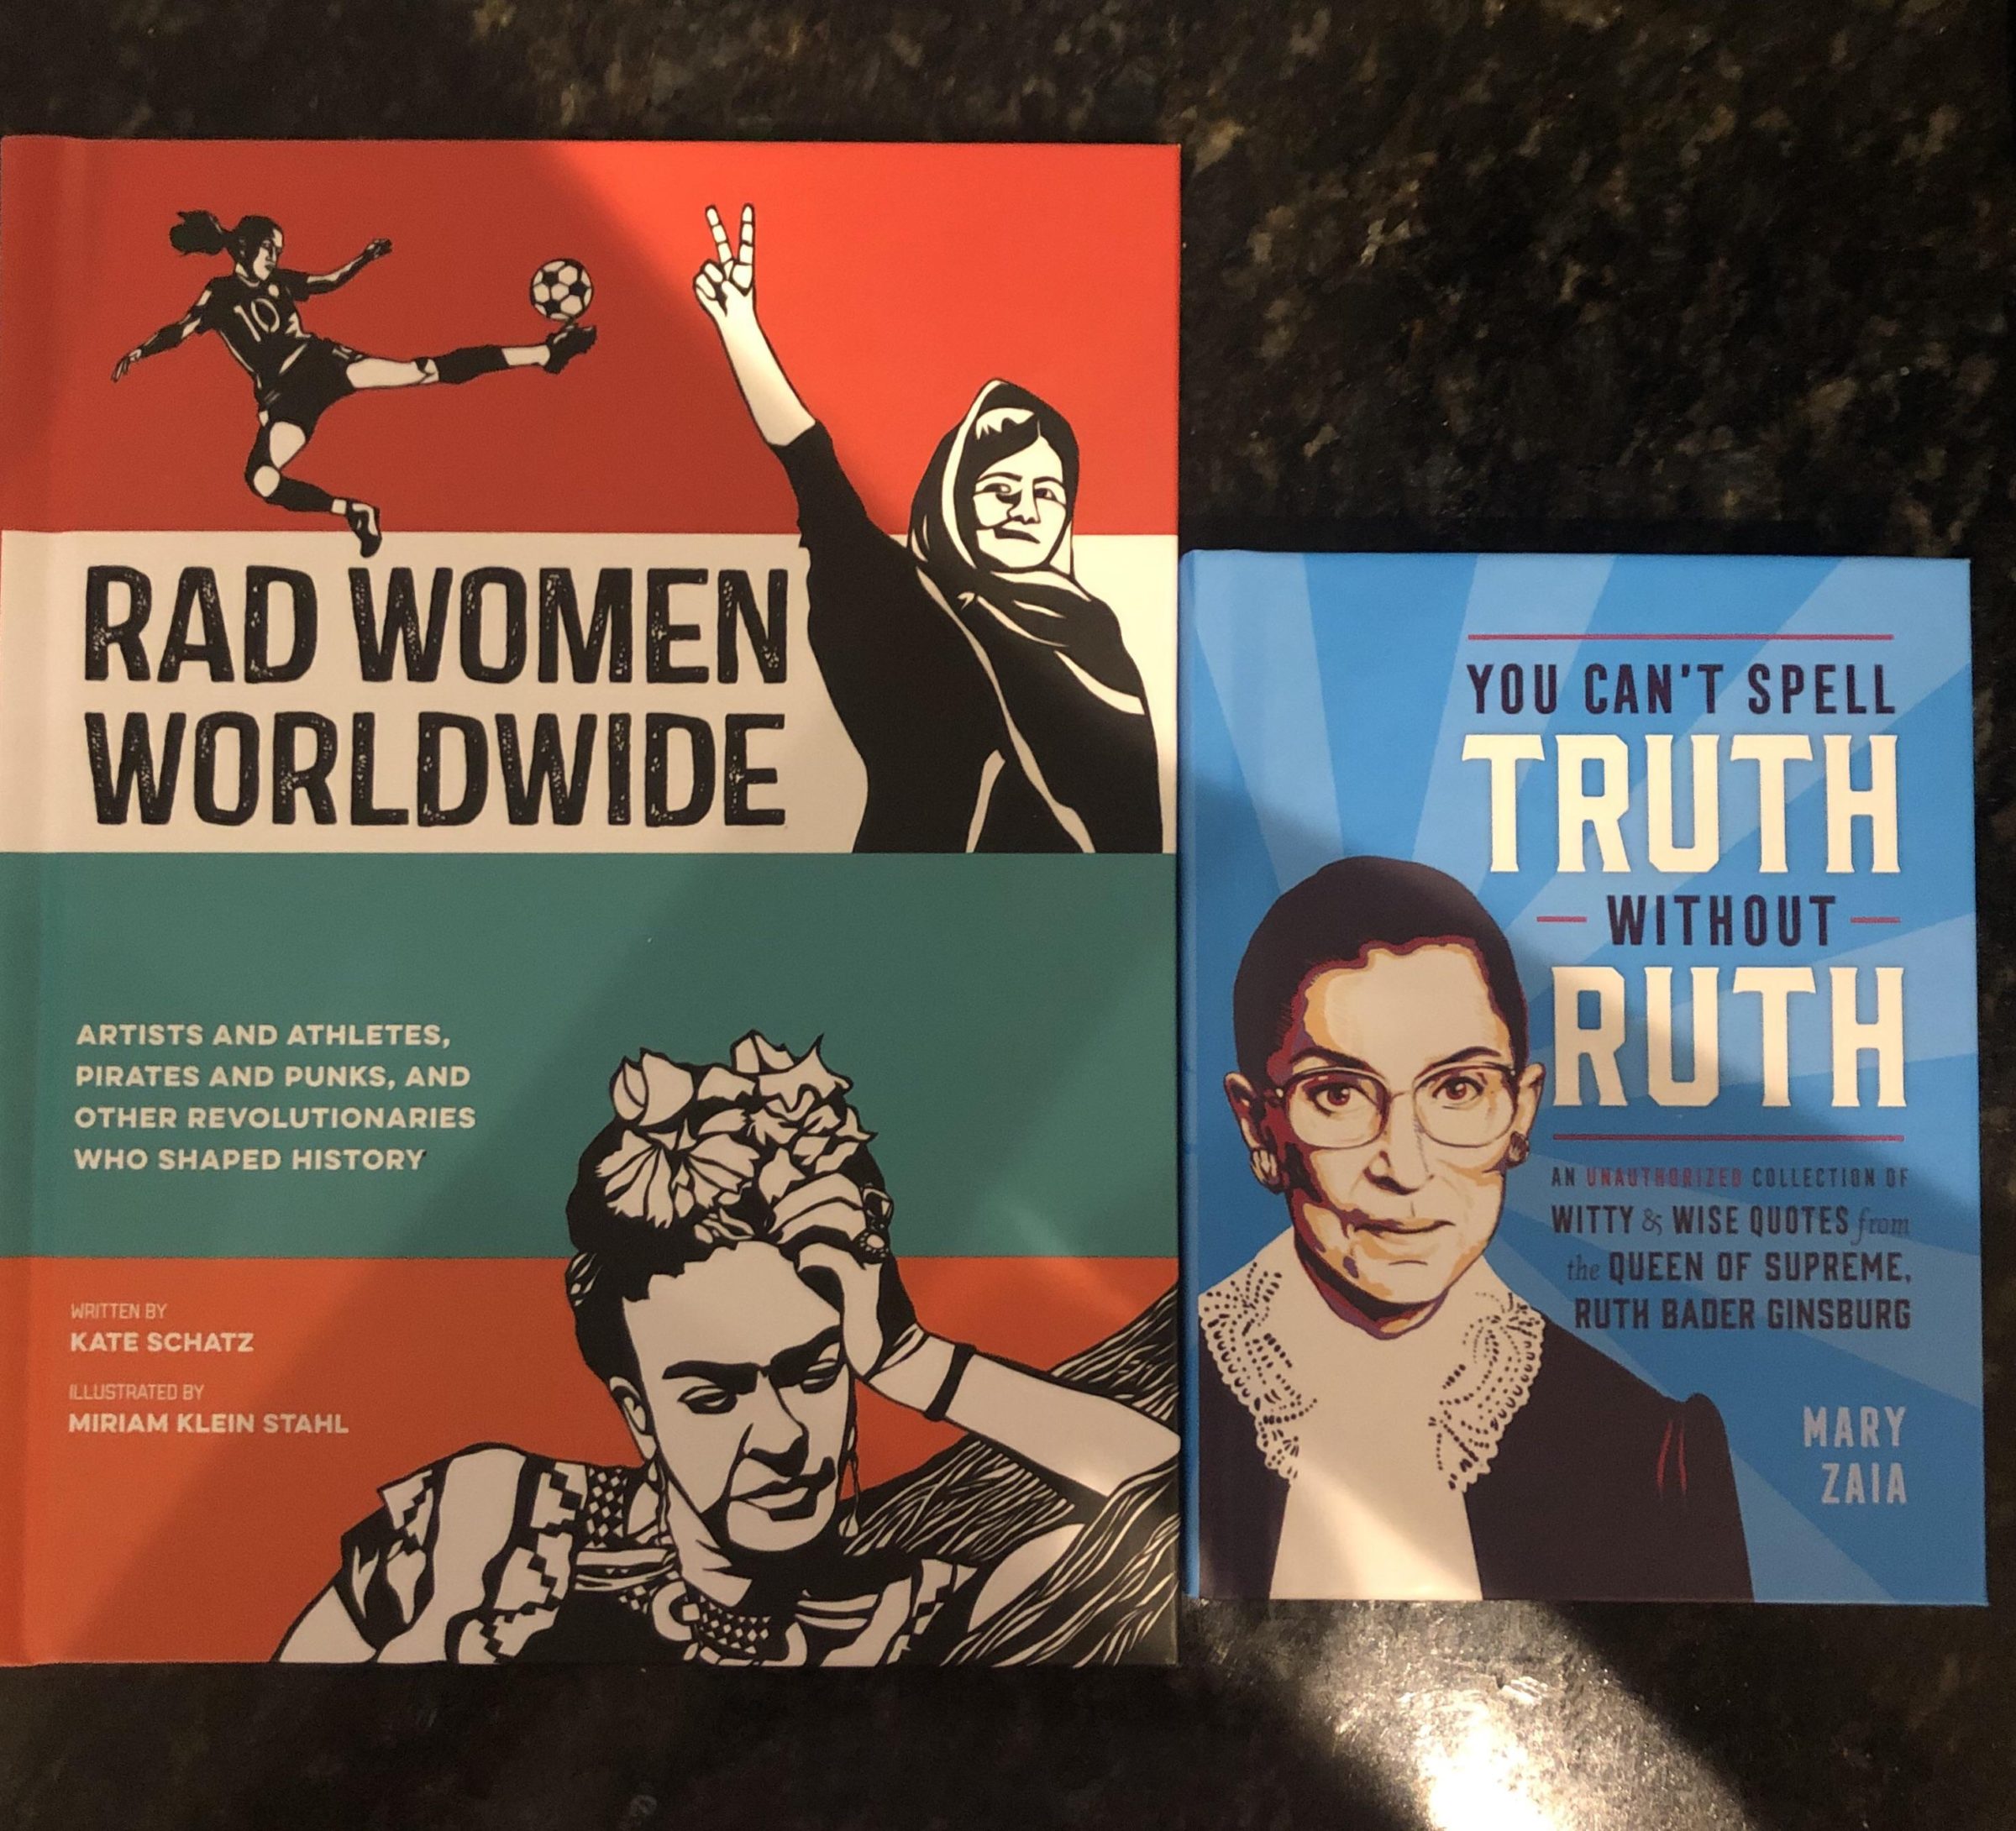 women feminine-memes women text: ARTISTS AND ATHLETES, PIRATES AND PUNKS, AND OTHER REVOLUTIONARIES WHO SHAPED HISTORY WRITTEN BY KATE SCHATZ ILLUSTRATED BY MIRIAM KLEIN STAHL RAD WOMEN WORLDWIDE the QUEEN OF SUPREME. RUTH BADER GINSBURG MARY ZAIA YOU CAN'T SPELL RUTH — WITHOUT RUTH AN WITTY S WISE 